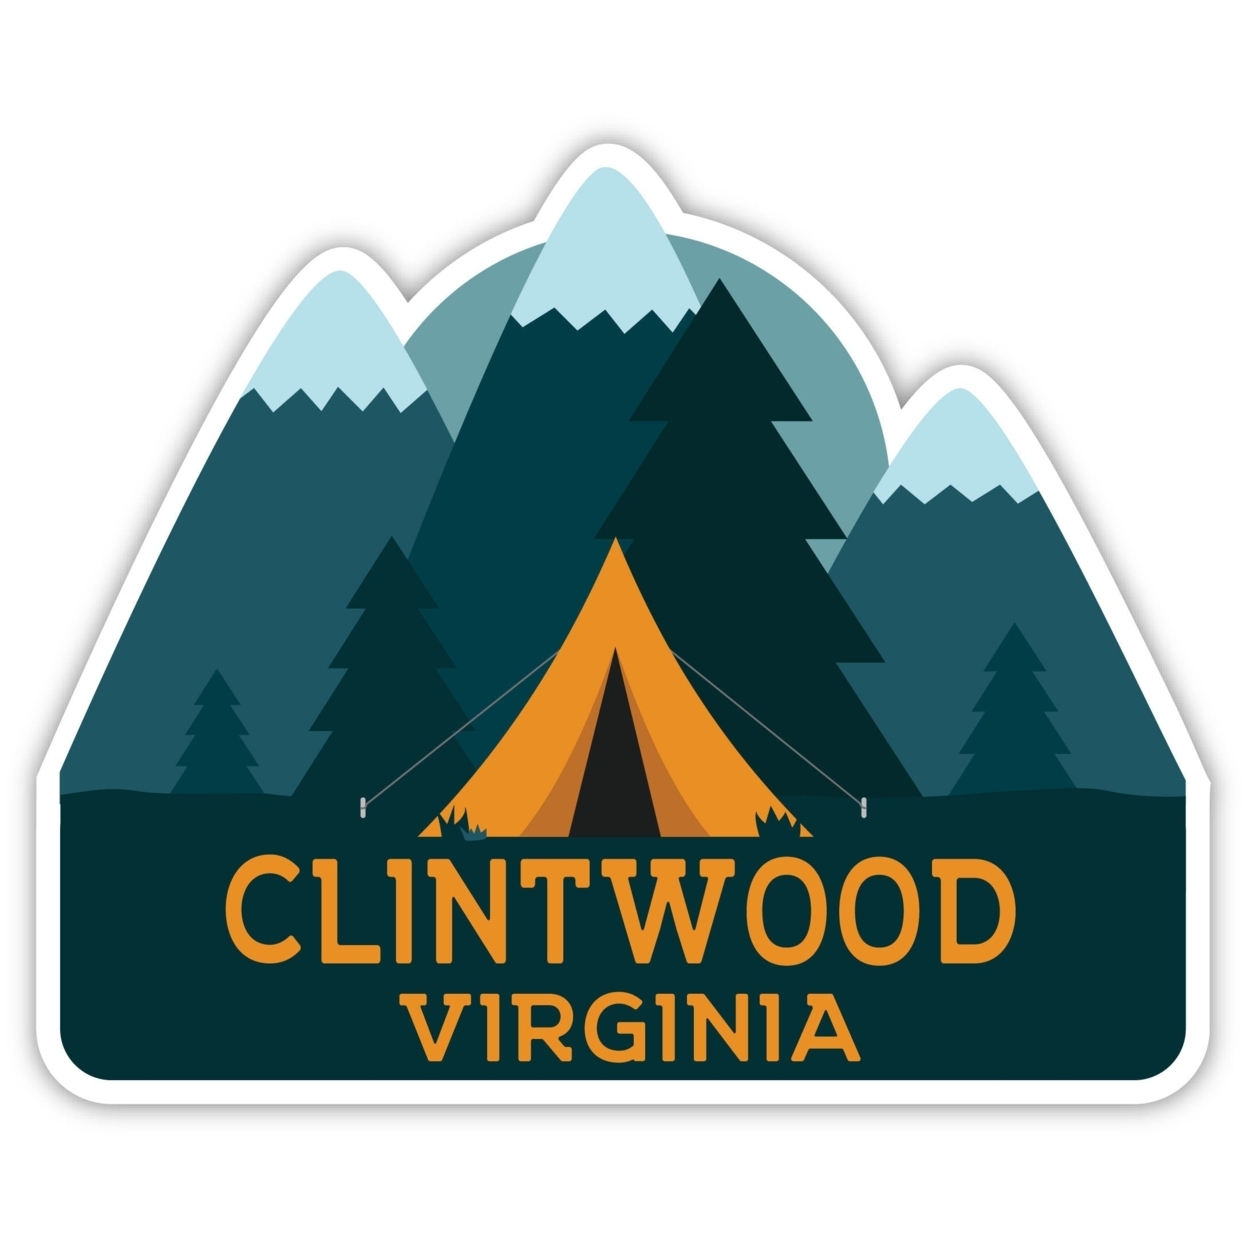 Clintwood Virginia Souvenir Decorative Stickers (Choose Theme And Size) - 4-Pack, 8-Inch, Tent